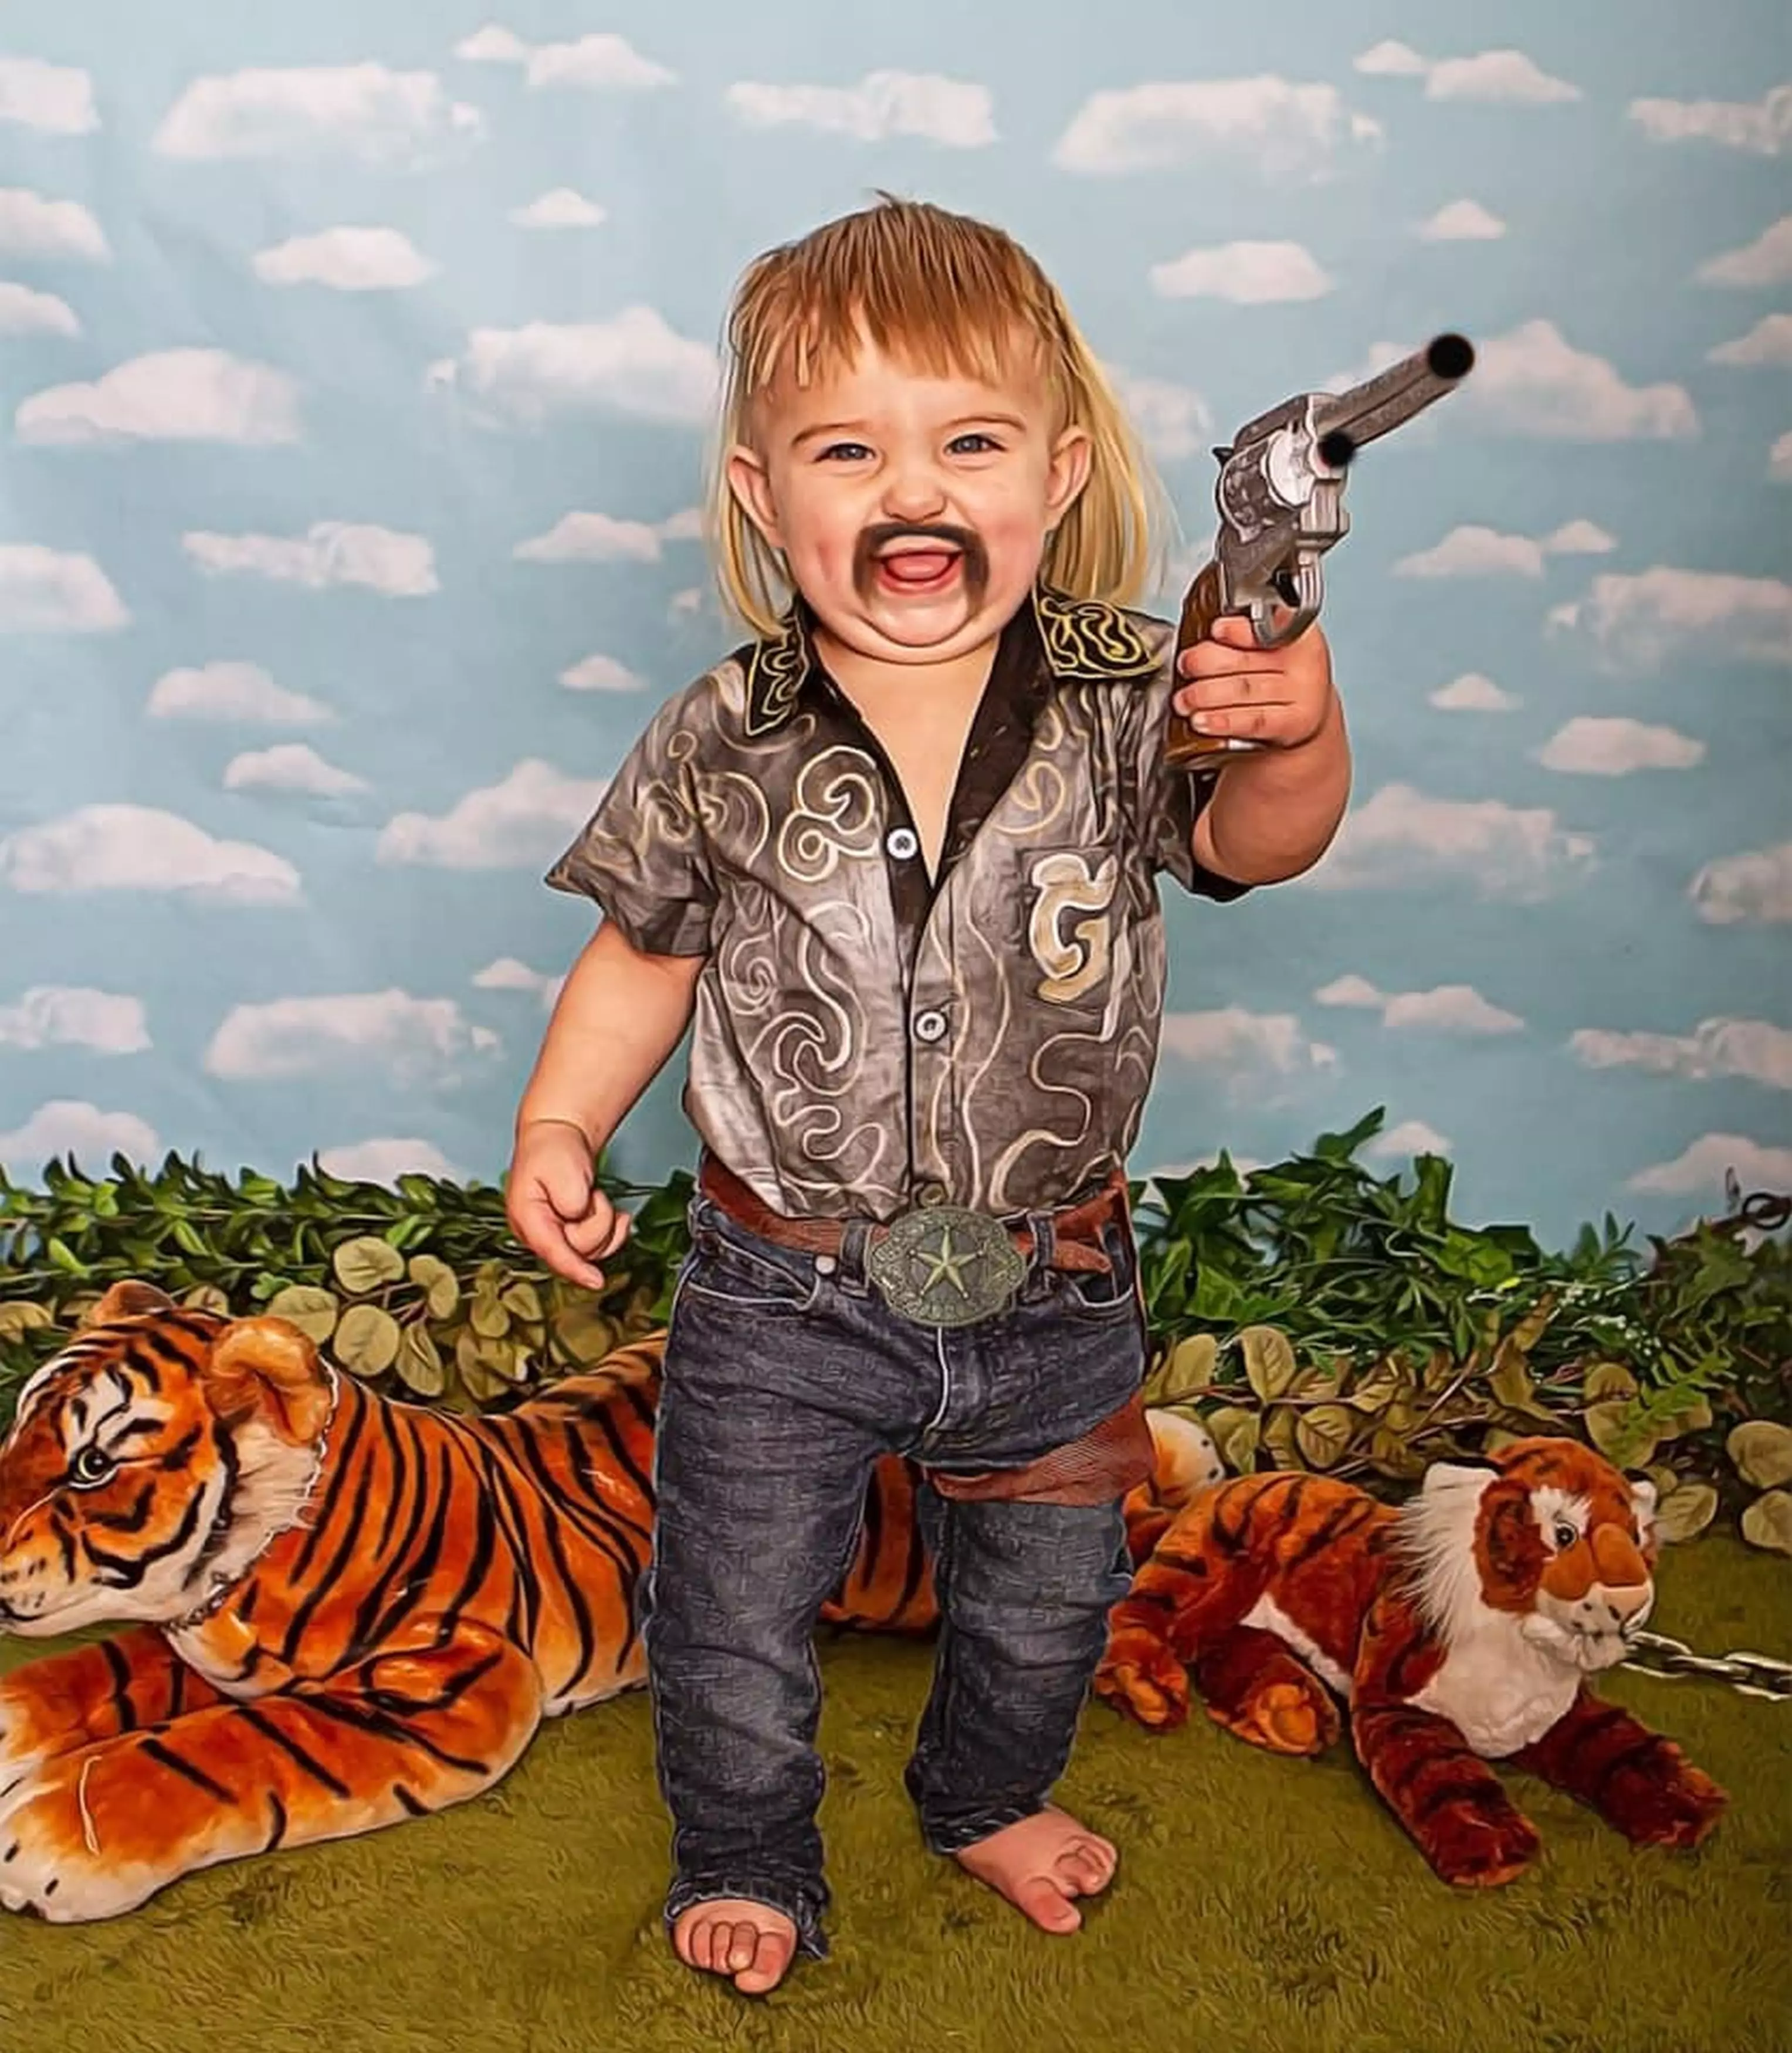 One-year-old Cavin dressed as Joe Exotic.